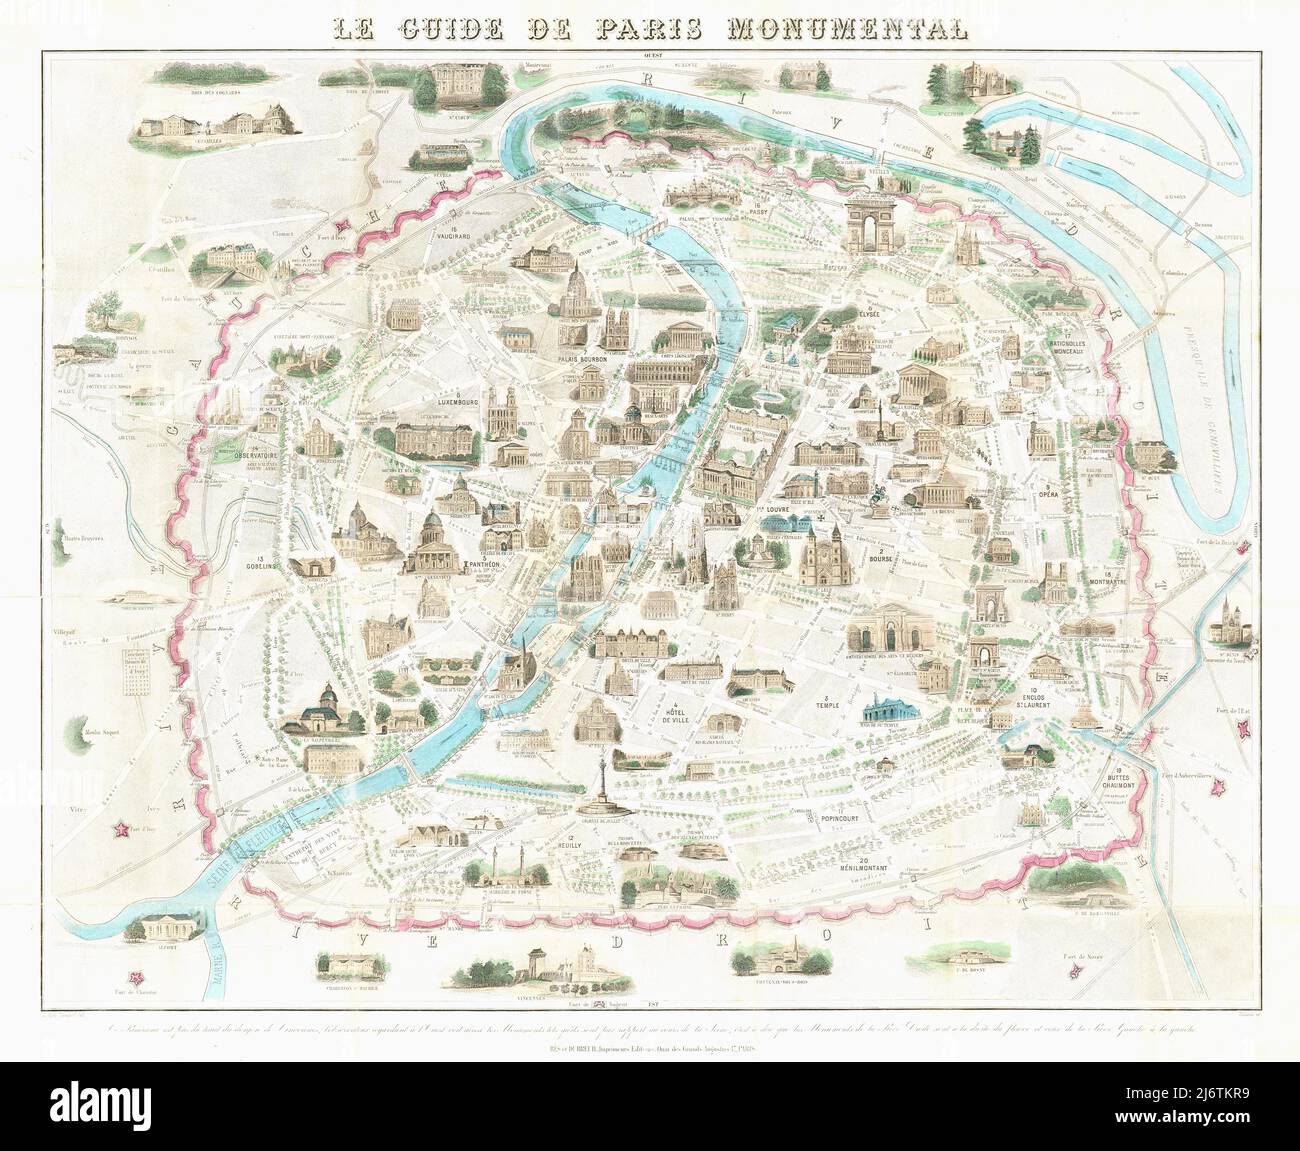 Testard & Buland - Pictorial Map of Paris with Monuments - 1878 Stock Photo